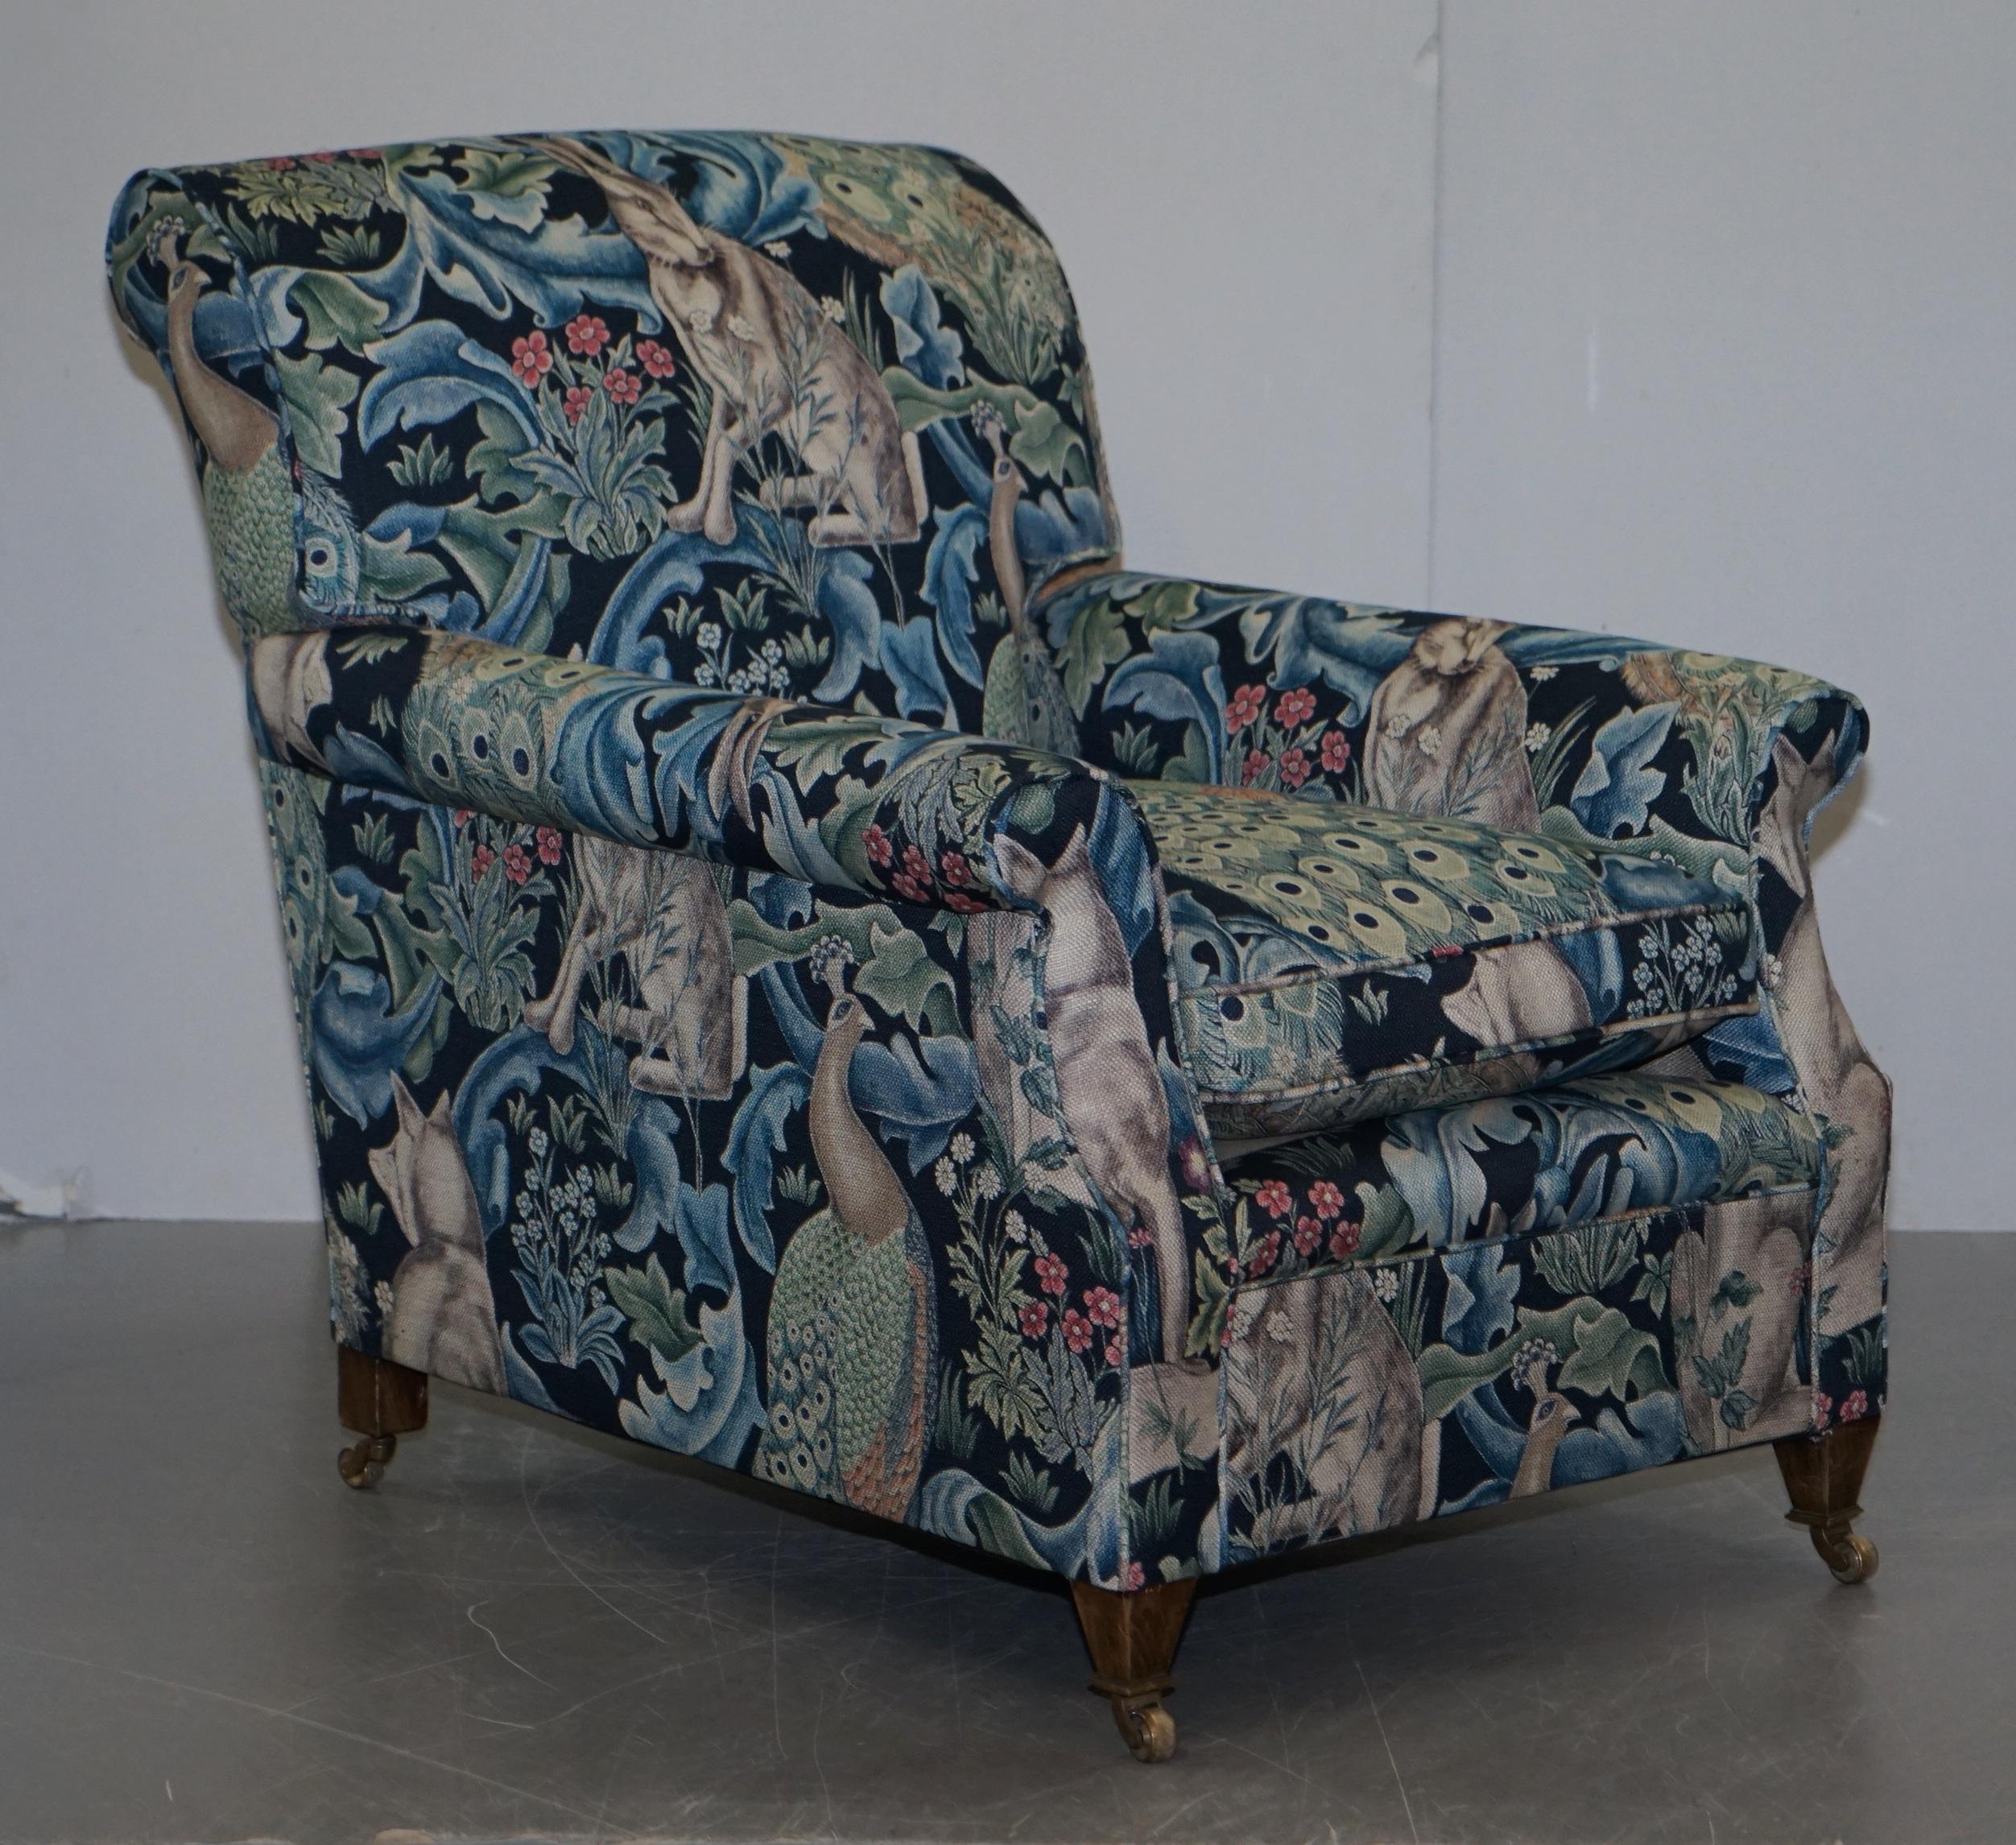 We are delighted to offer for sale this pair of exquisite fully restored George Smith Signature Armchairs with all new William Morris Forest Linen upholstery

If you are looking at this listing the chances are you know all about George Smith